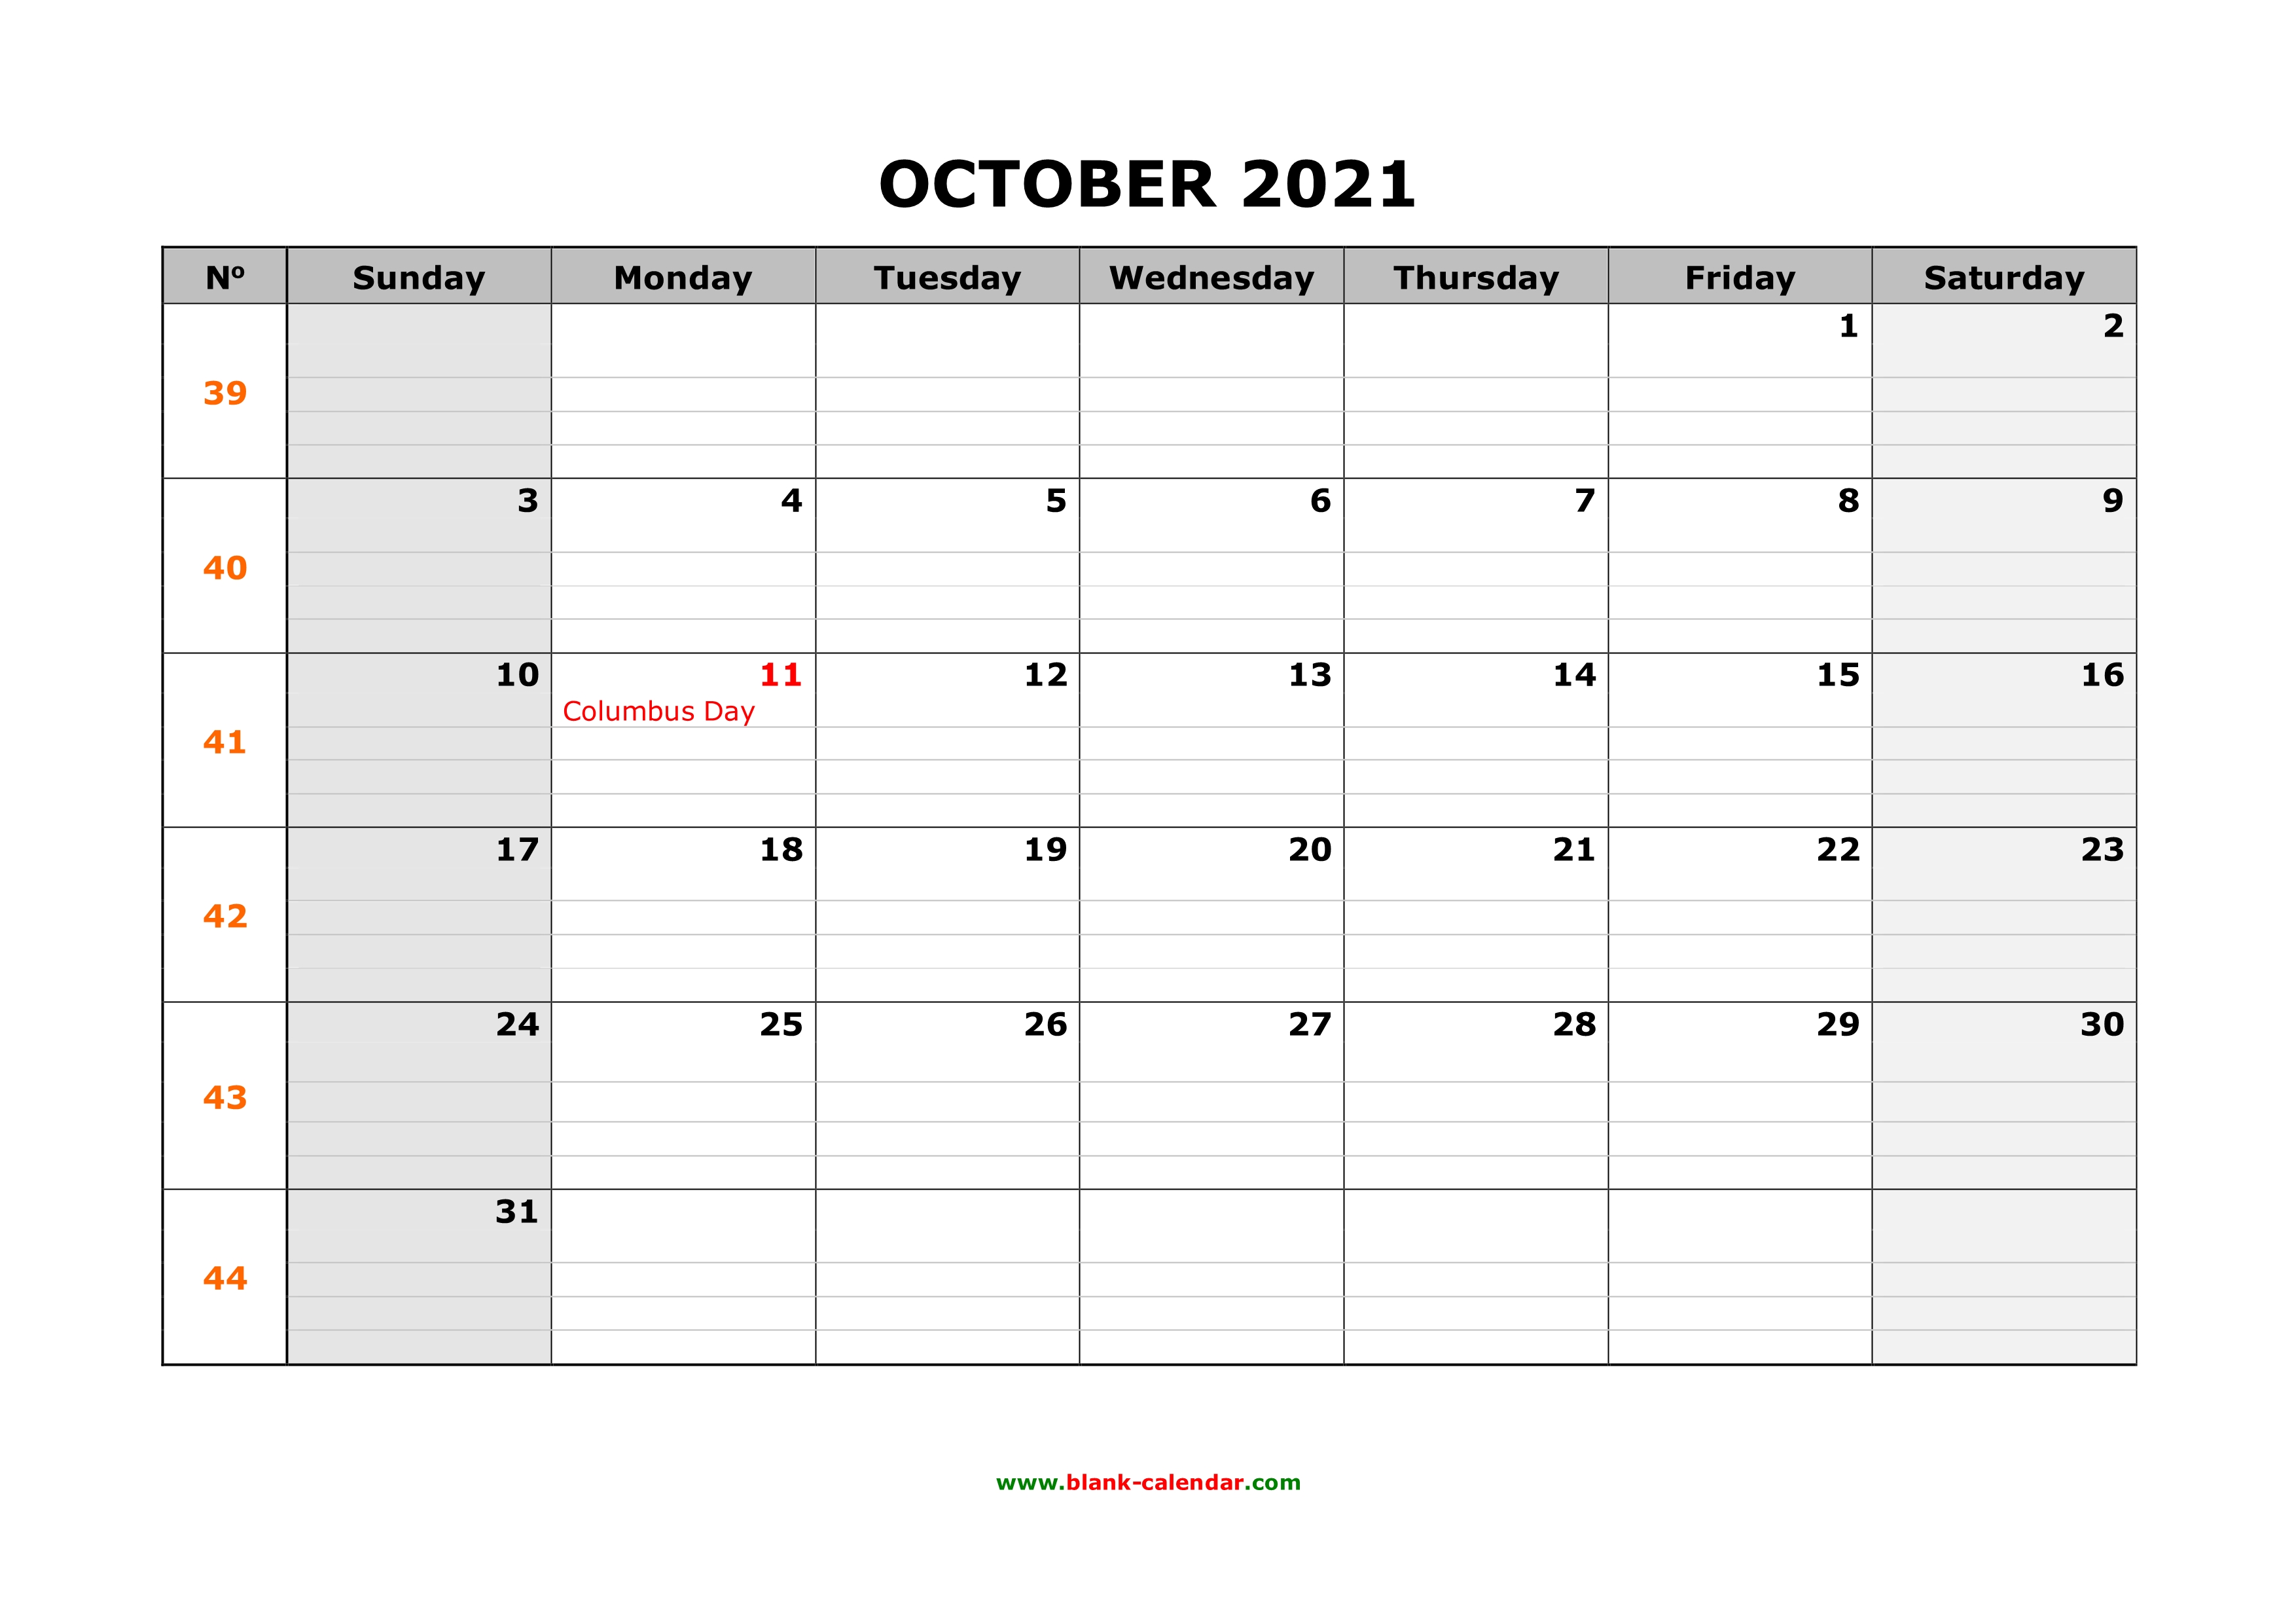 free download printable october 2021 calendar large box grid space for notes